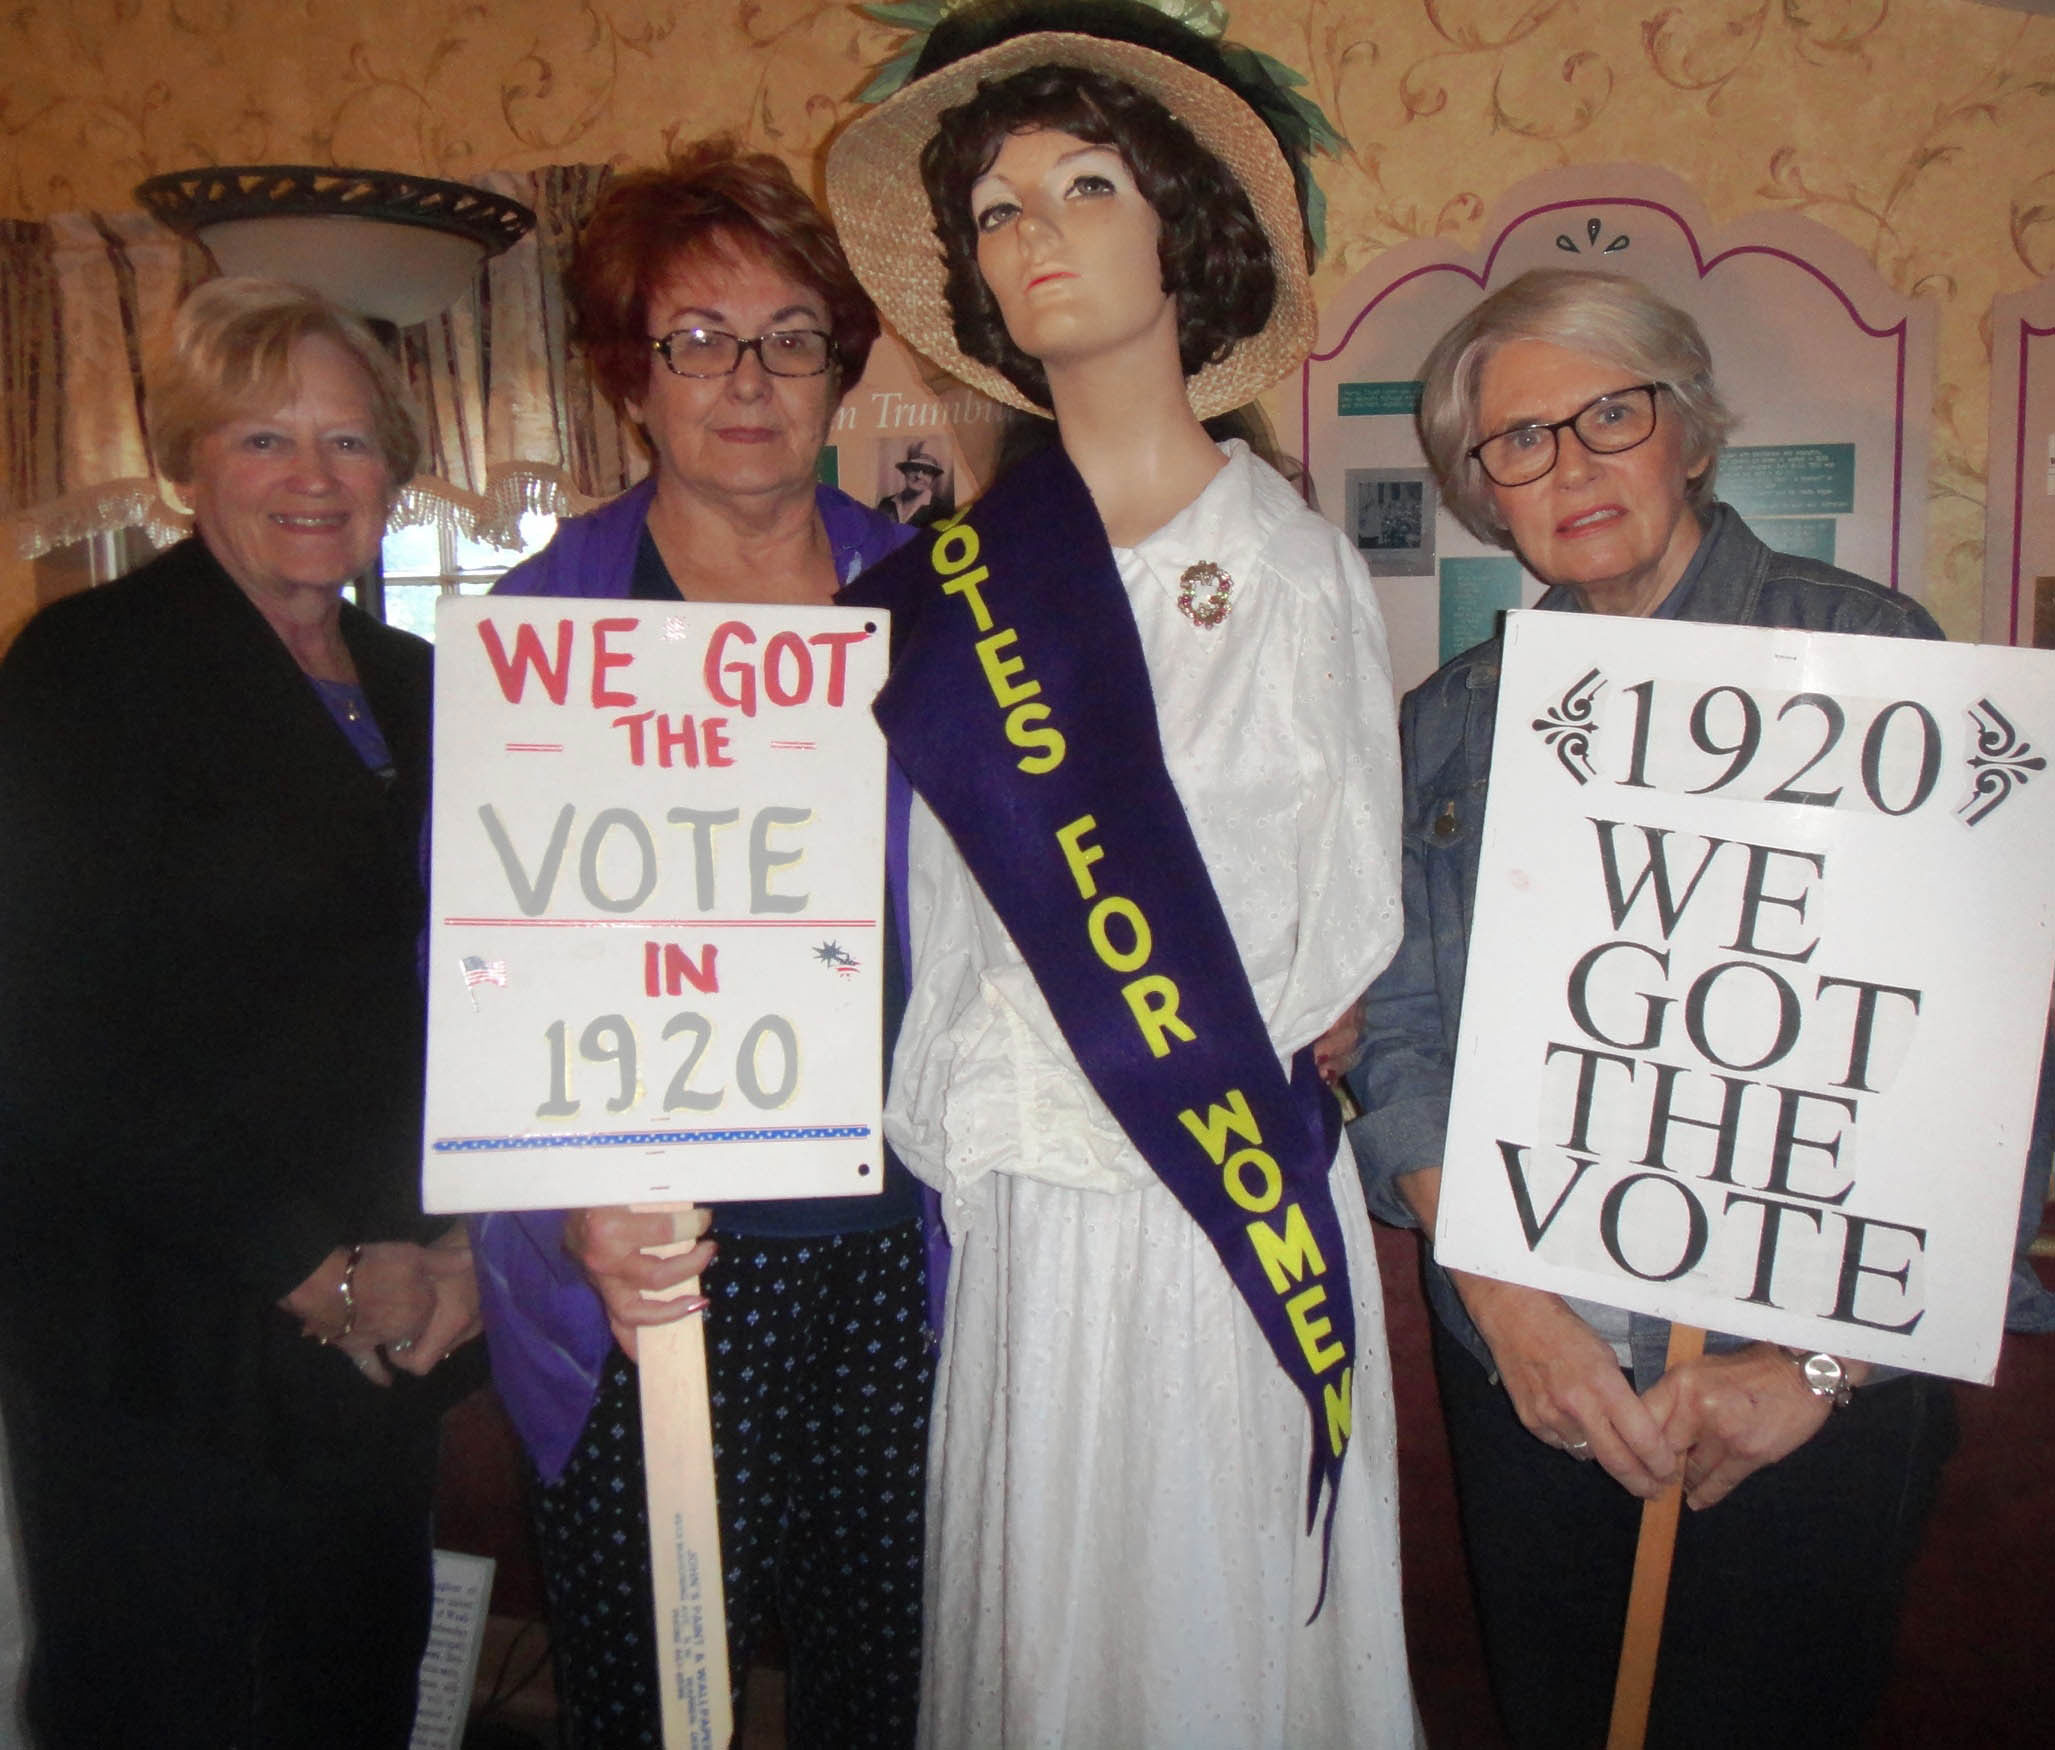 SPECIAL TO THE VINDICATOR
From left, are Martha Flint, Sandra Sarsany and Ann Miller, with artifacts from the women’s suffrage museum in the Harriet Taylor Upton House. On Election Day, Nov. 8, conversations with Harriet Taylor Upton will be featured from 2 to 7 p.m. Upton will be portrayed by an Upton board member. The event will take place in the house at 380 Mahoning Ave., downtown Warren. Conversations with the public were important to Harriet as she was a leading suffragette, fighting for women’s right to vote. Refreshments will be served. For information visit www.uptonhouse.org or call 330-395-1840. Private tours are available and the home is available to rent for small parties.